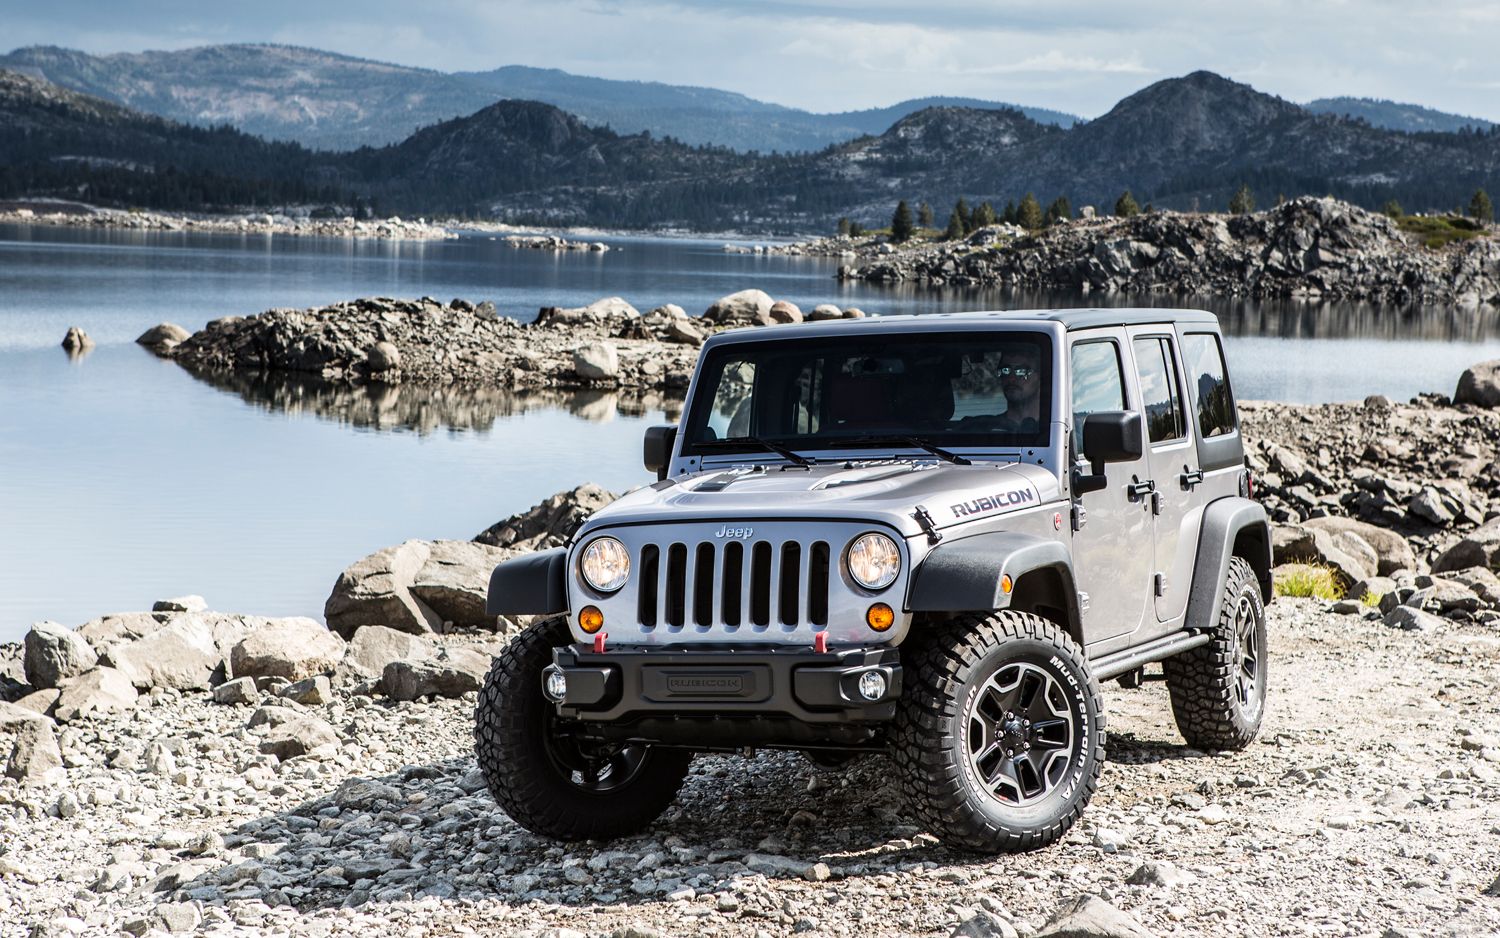 Free download 91 jeep wrangler wallpaper 2013 Jeep Wrangler Rubicon Unlimited Front [1500x938] for your Desktop, Mobile & Tablet. Explore Jeep Wrangler Unlimited Wallpaper. Jeep Wrangler Image Wallpaper, Jeep